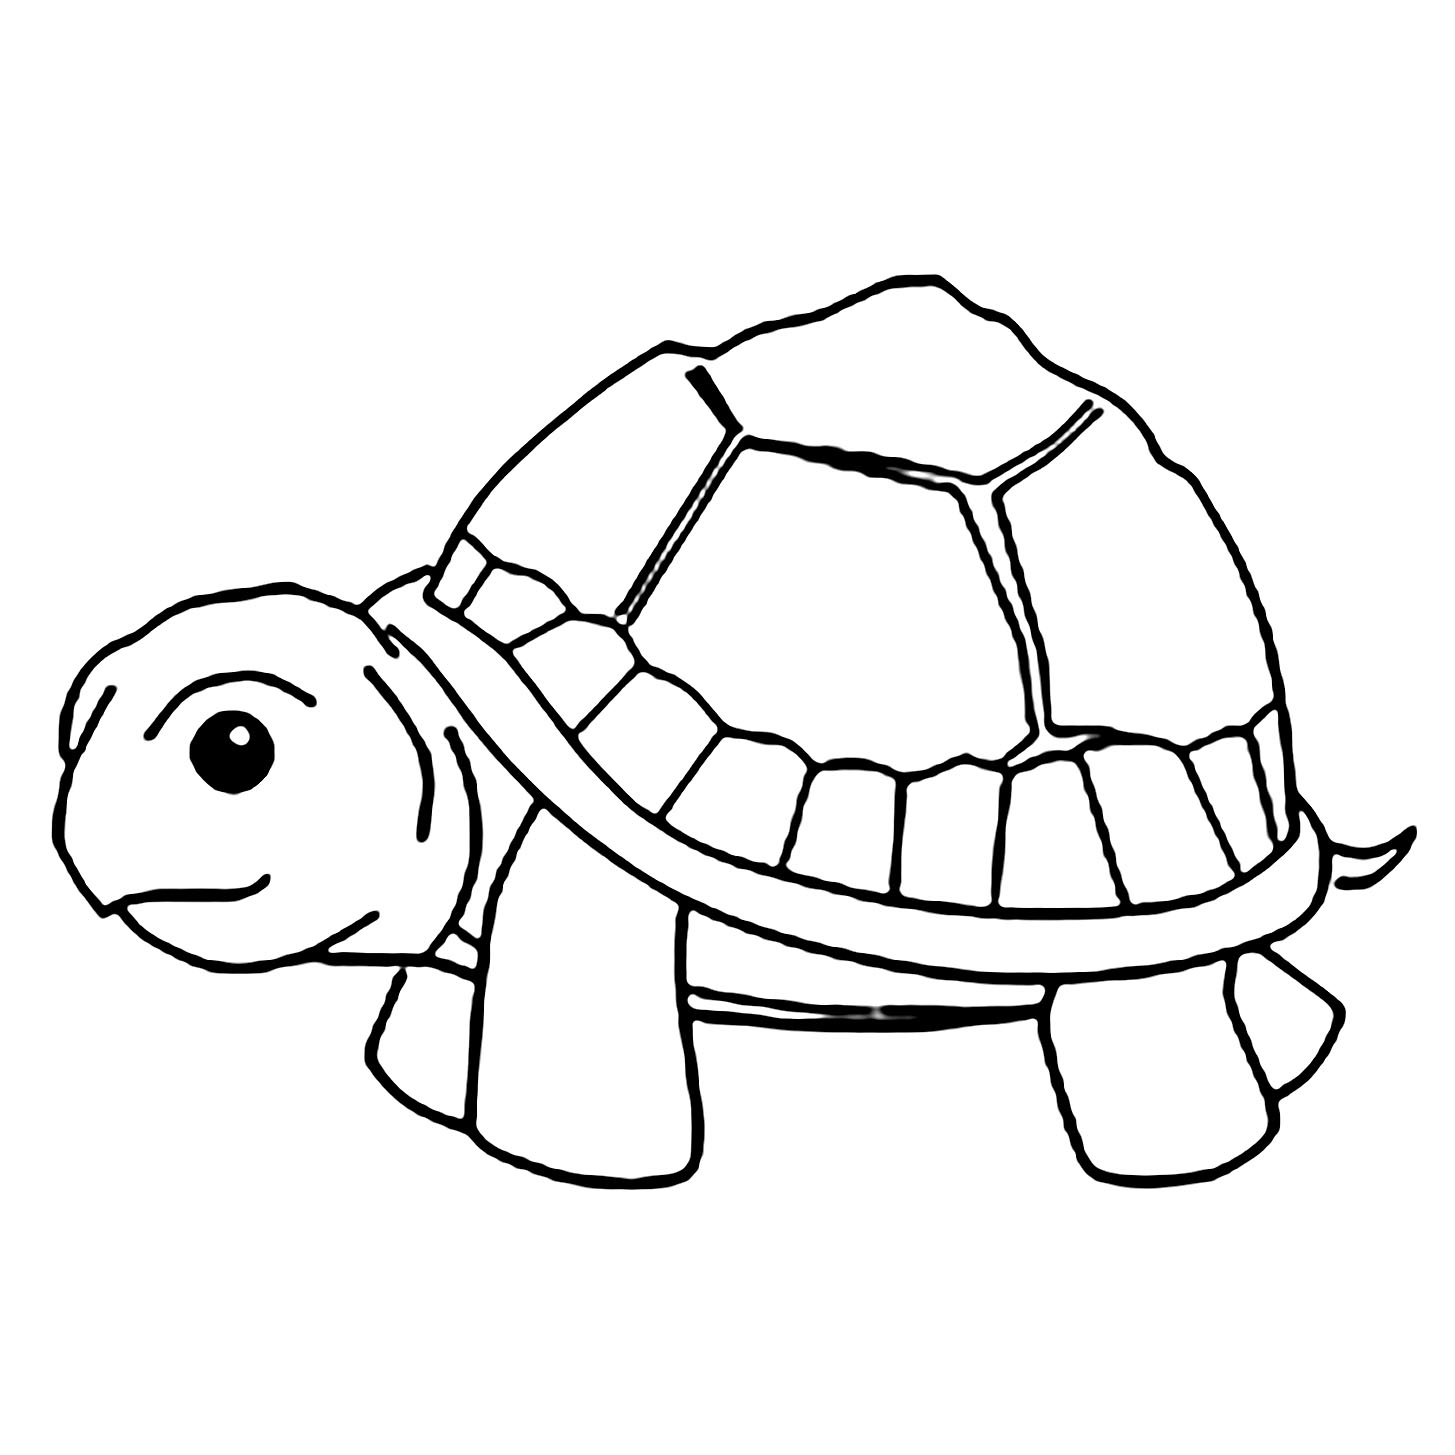 Turtles to download - Turtles Kids Coloring Pages